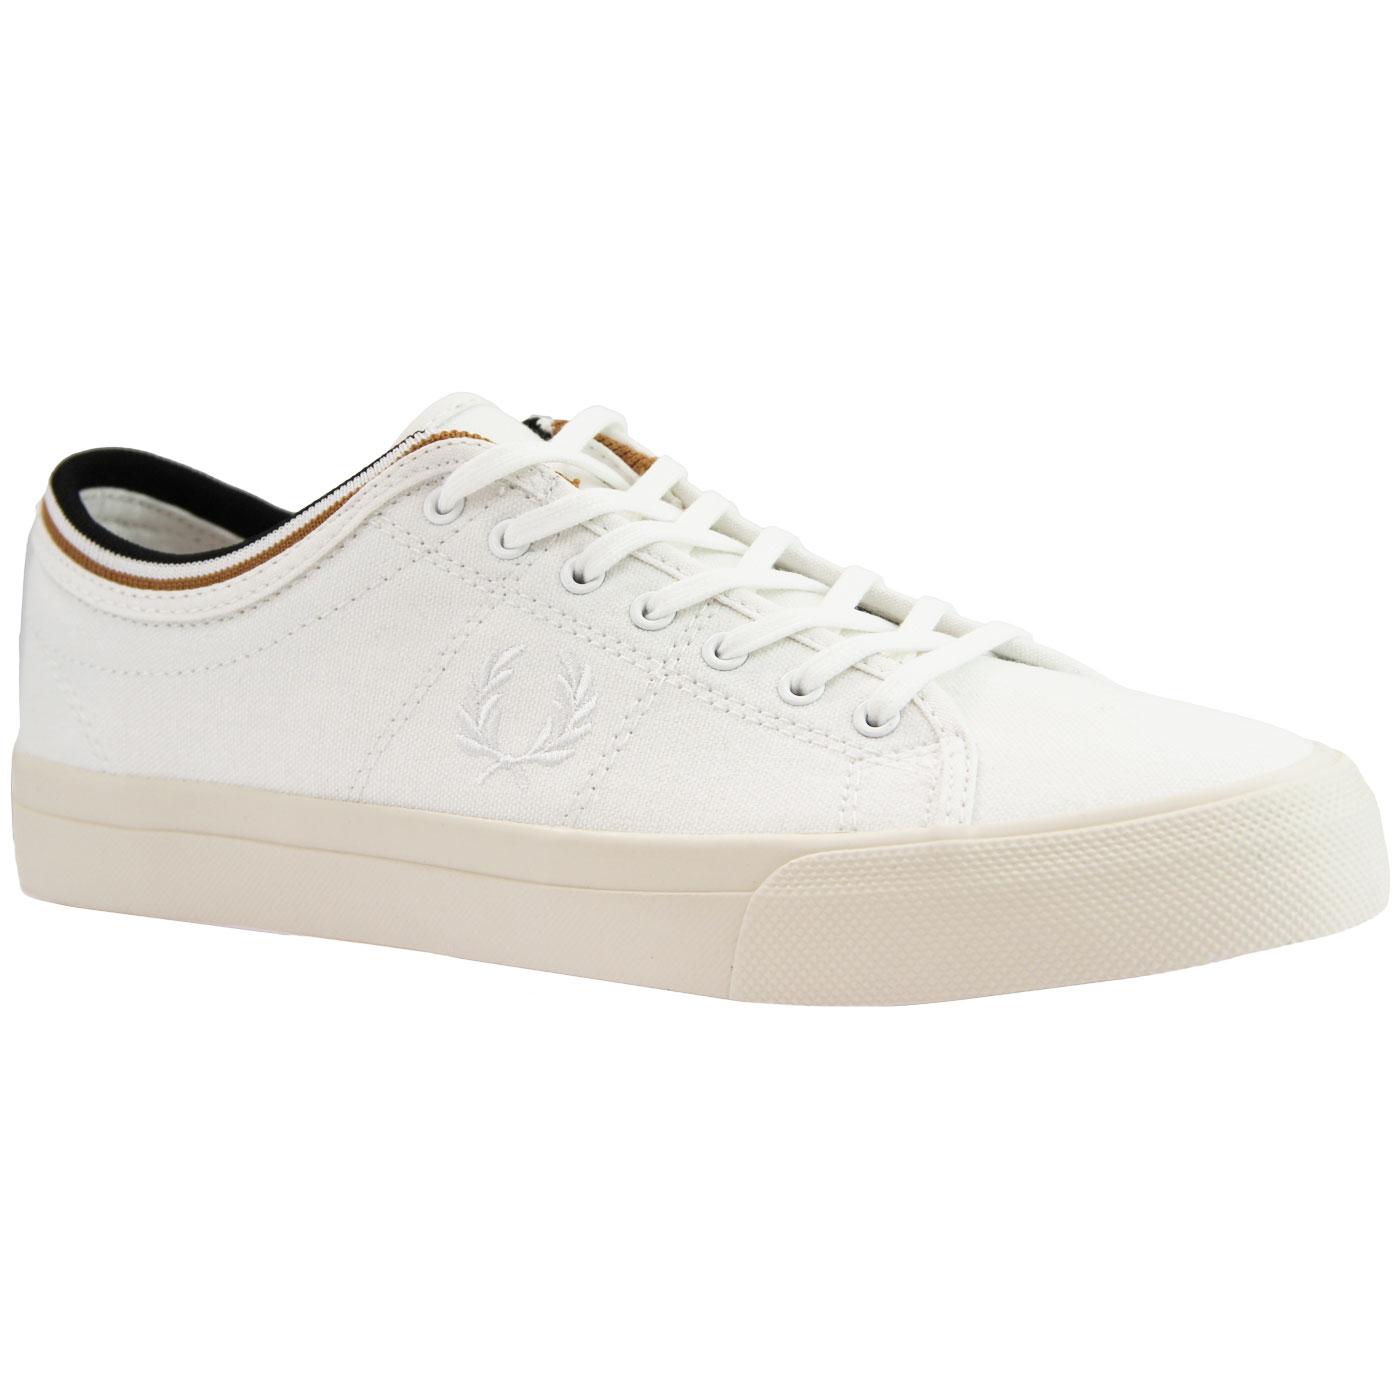 Kendrick FRED PERRY Retro Tipped Canvas Trainers